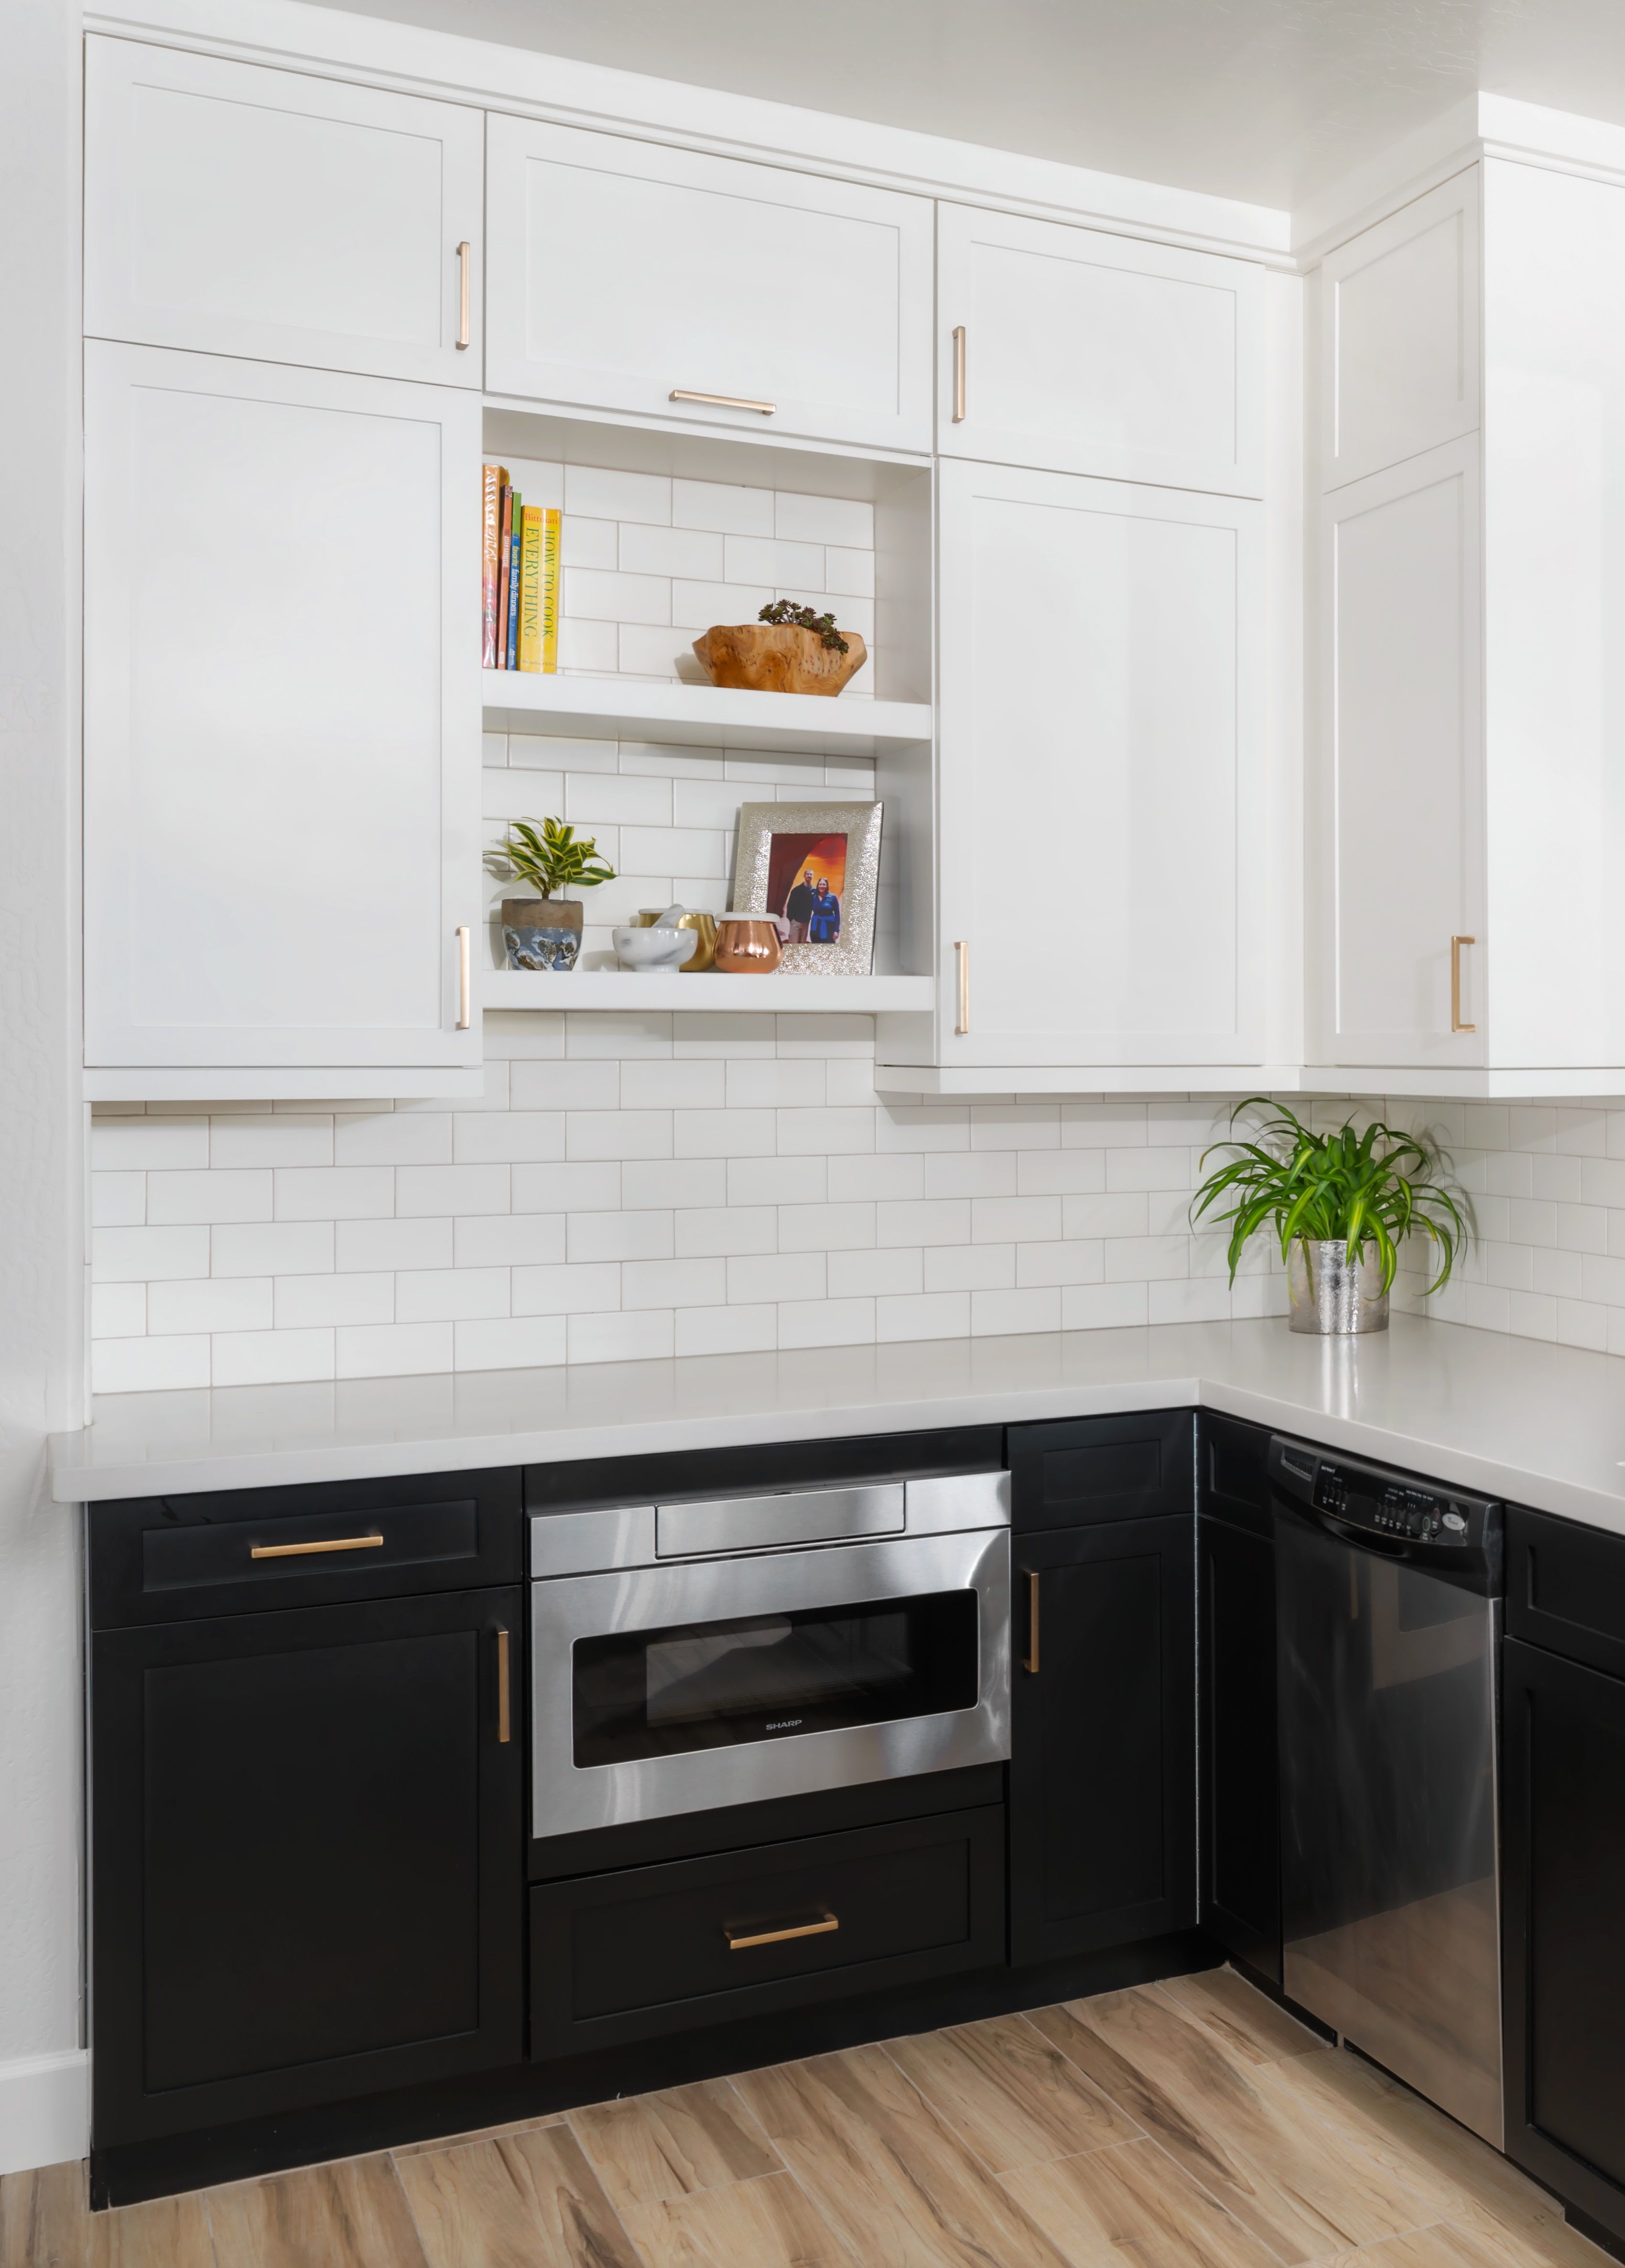 white floating shelves between uppers with black bases cabinets cabinetsolutionsusa weenrichhomelife kitchen interiors interiordesign target wall bookshelves deep corner shelf